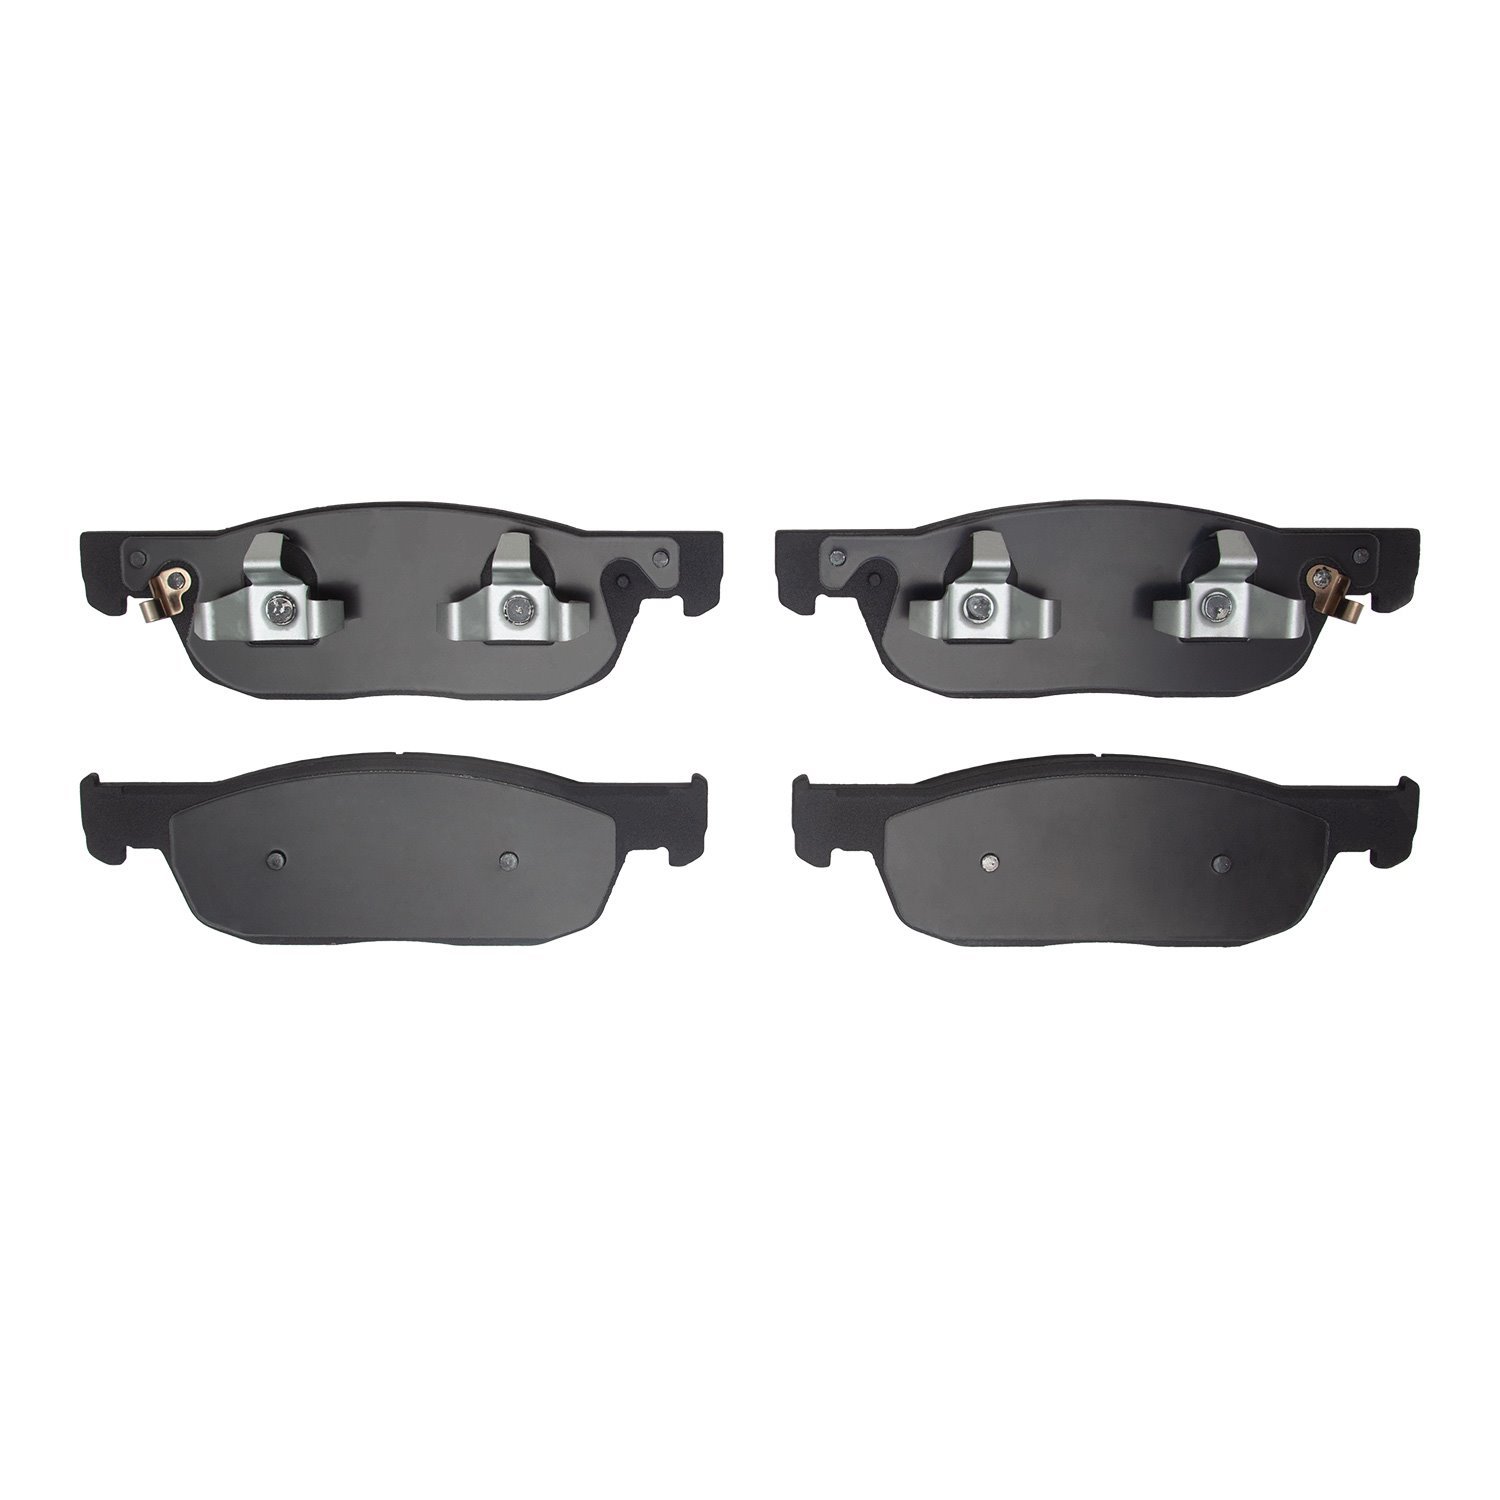 1551-2396-00 5000 Advanced Ceramic Brake Pads, Fits Select Acura/Honda, Position: Front